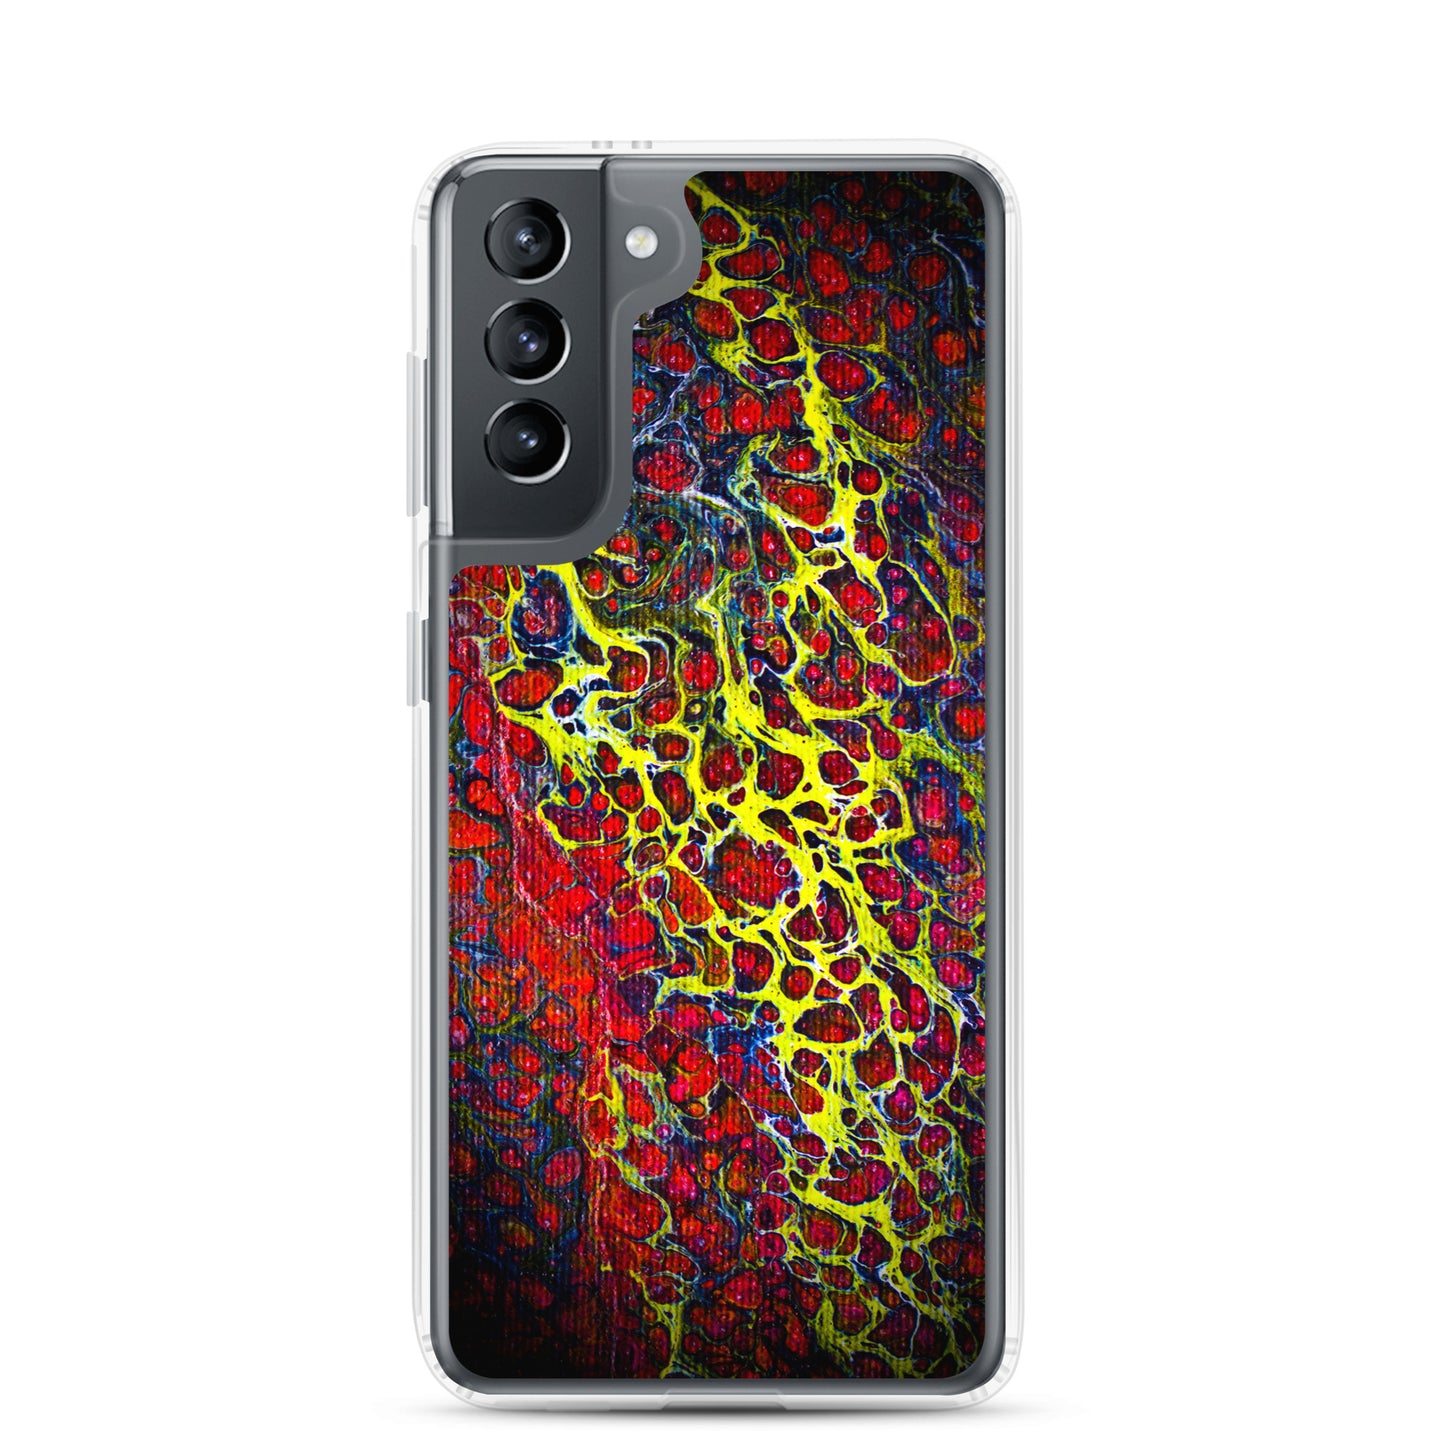 NightOwl Studio Custom Phone Case Compatible with Samsung Galaxy, Slim Cover for Wireless Charging, Drop and Scratch Resistant, Boho Art Colors, Crown of Thorns